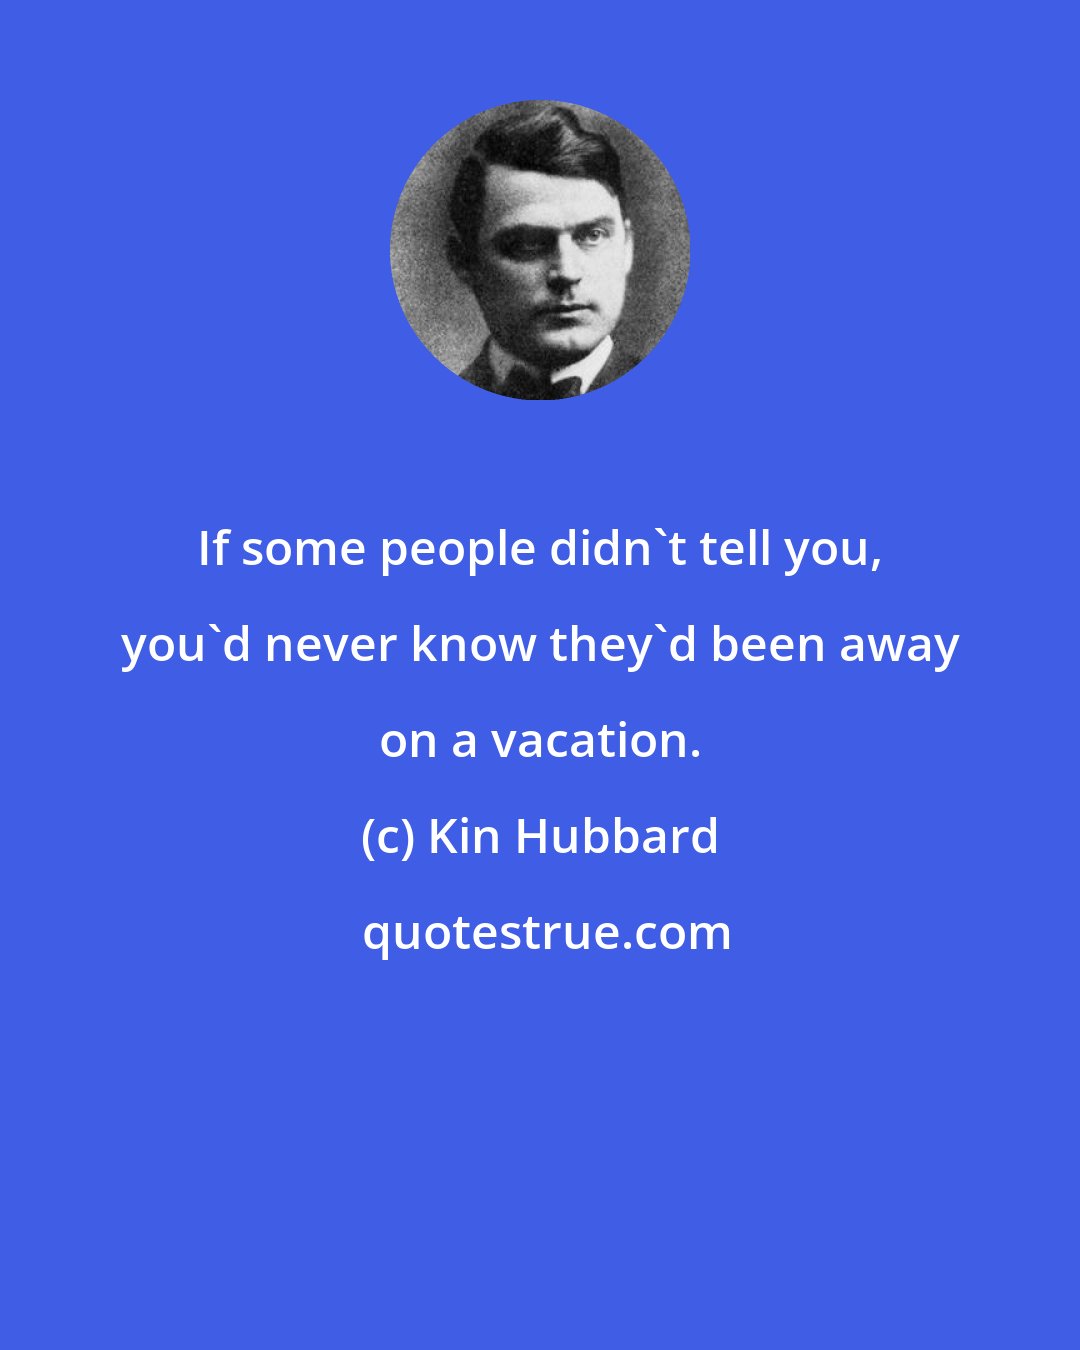 Kin Hubbard: If some people didn't tell you, you'd never know they'd been away on a vacation.